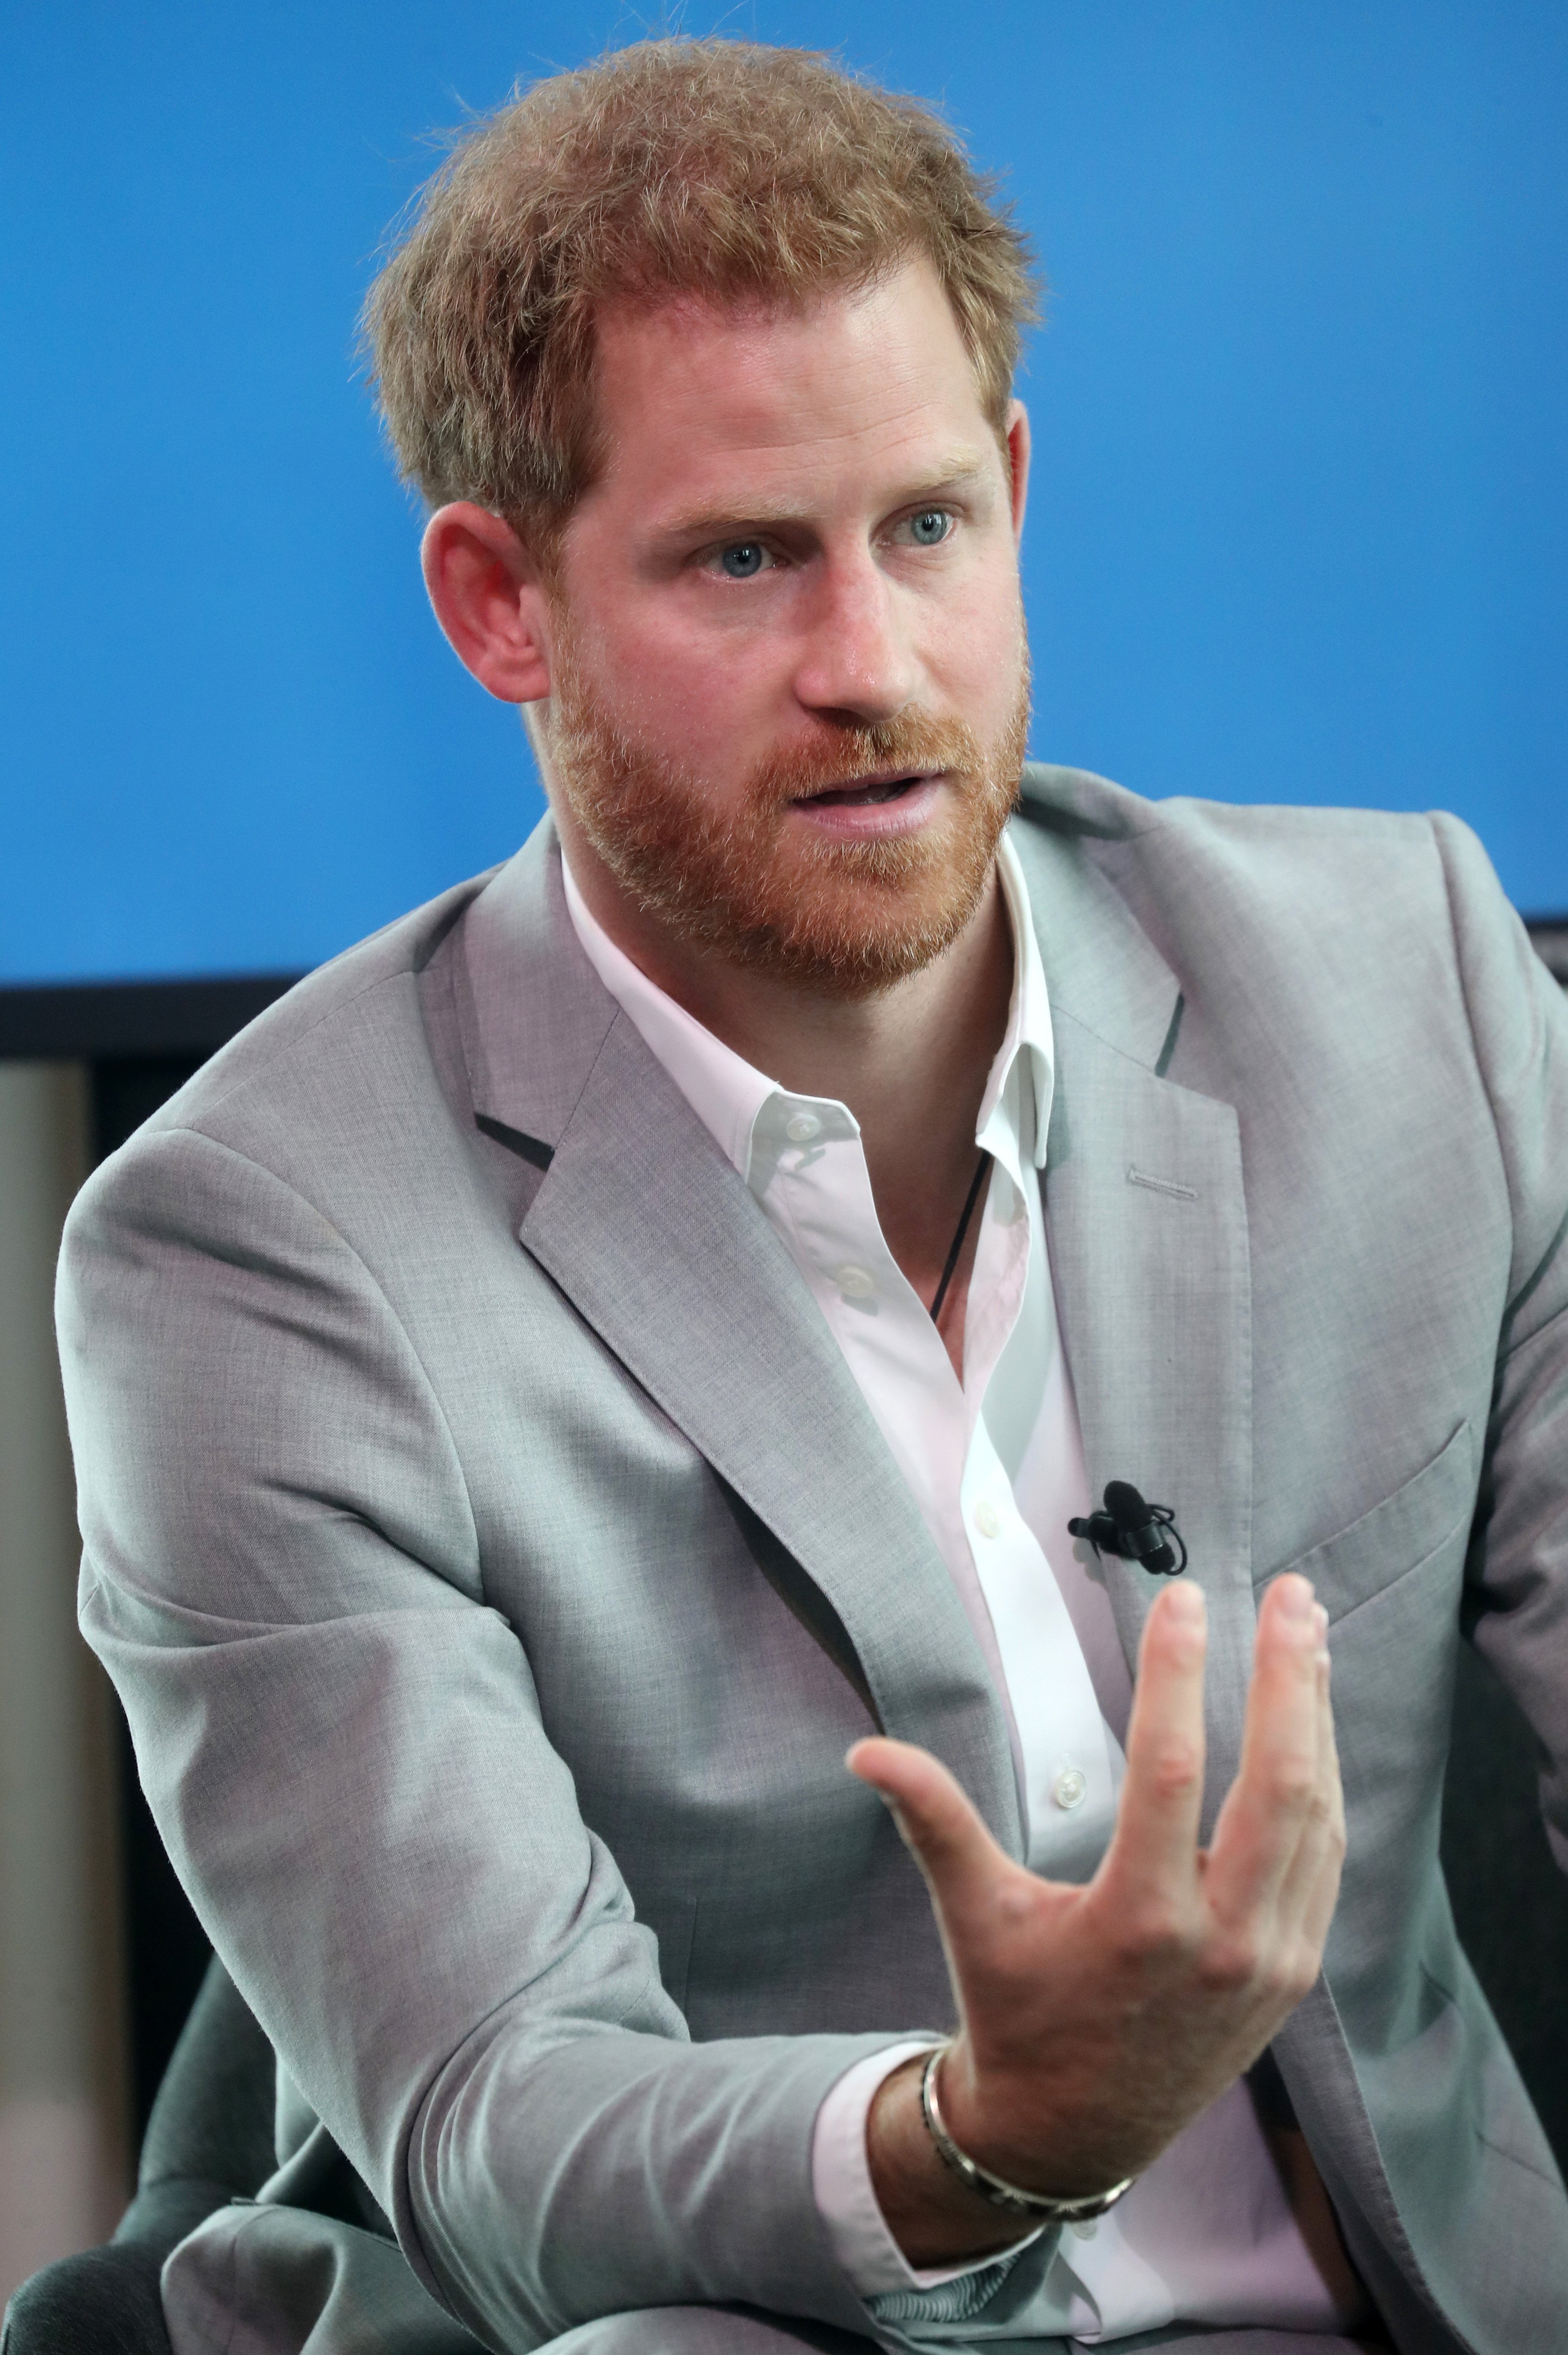 Prince Harry, Duke of Sussex announces a partnership between Booking.com, SkyScanner, CTrip, TripAdvisor and Visa called 'Travalyst' at A'dam Tower on September 03, 2019 in Amsterdam, Netherlands | Source: Getty Images